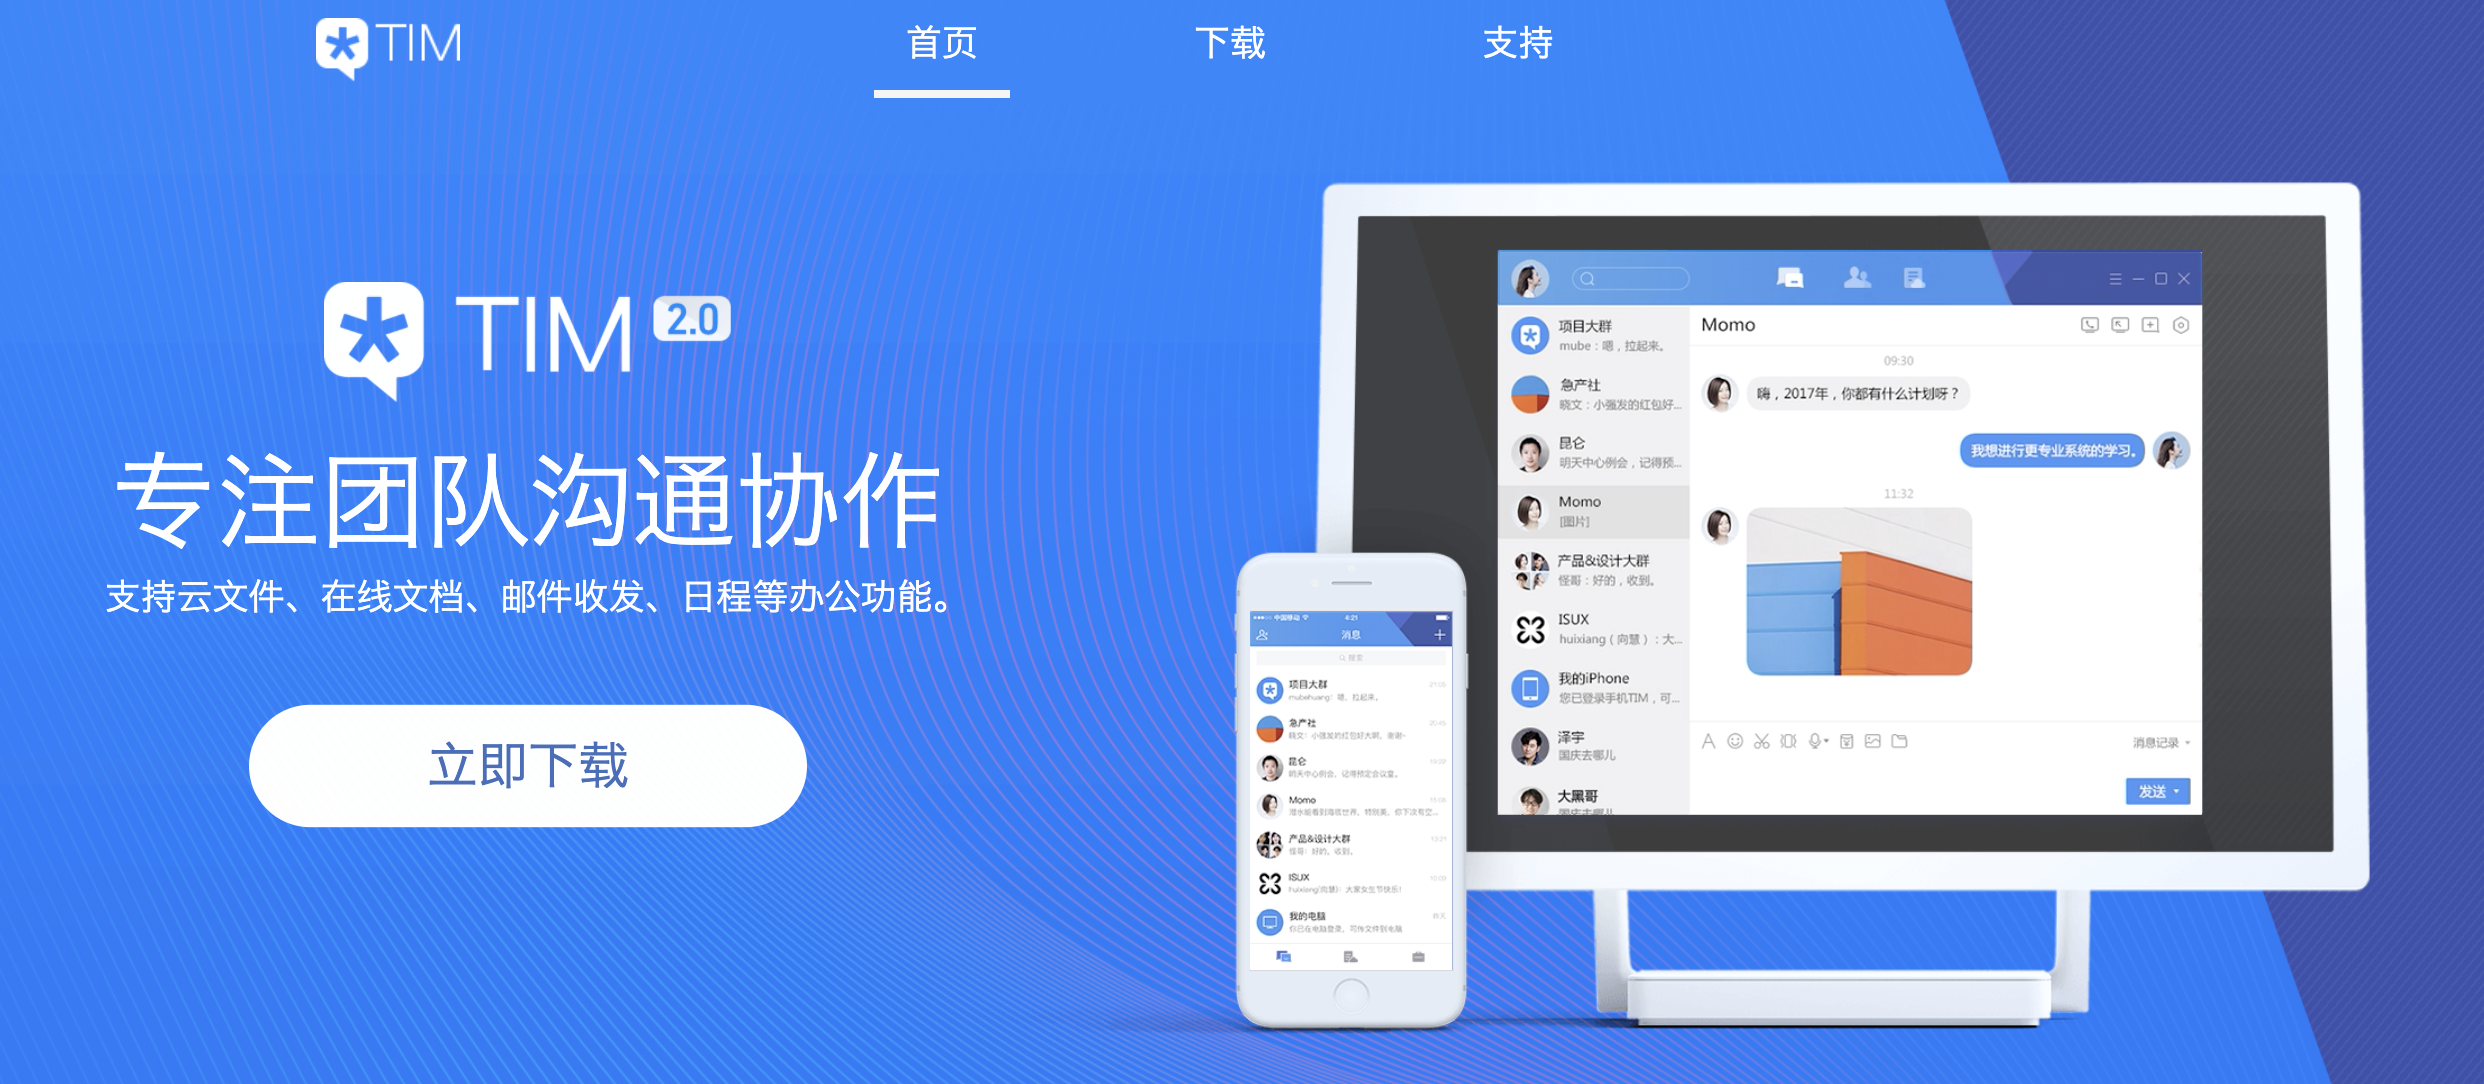 does appcloner work on wechat